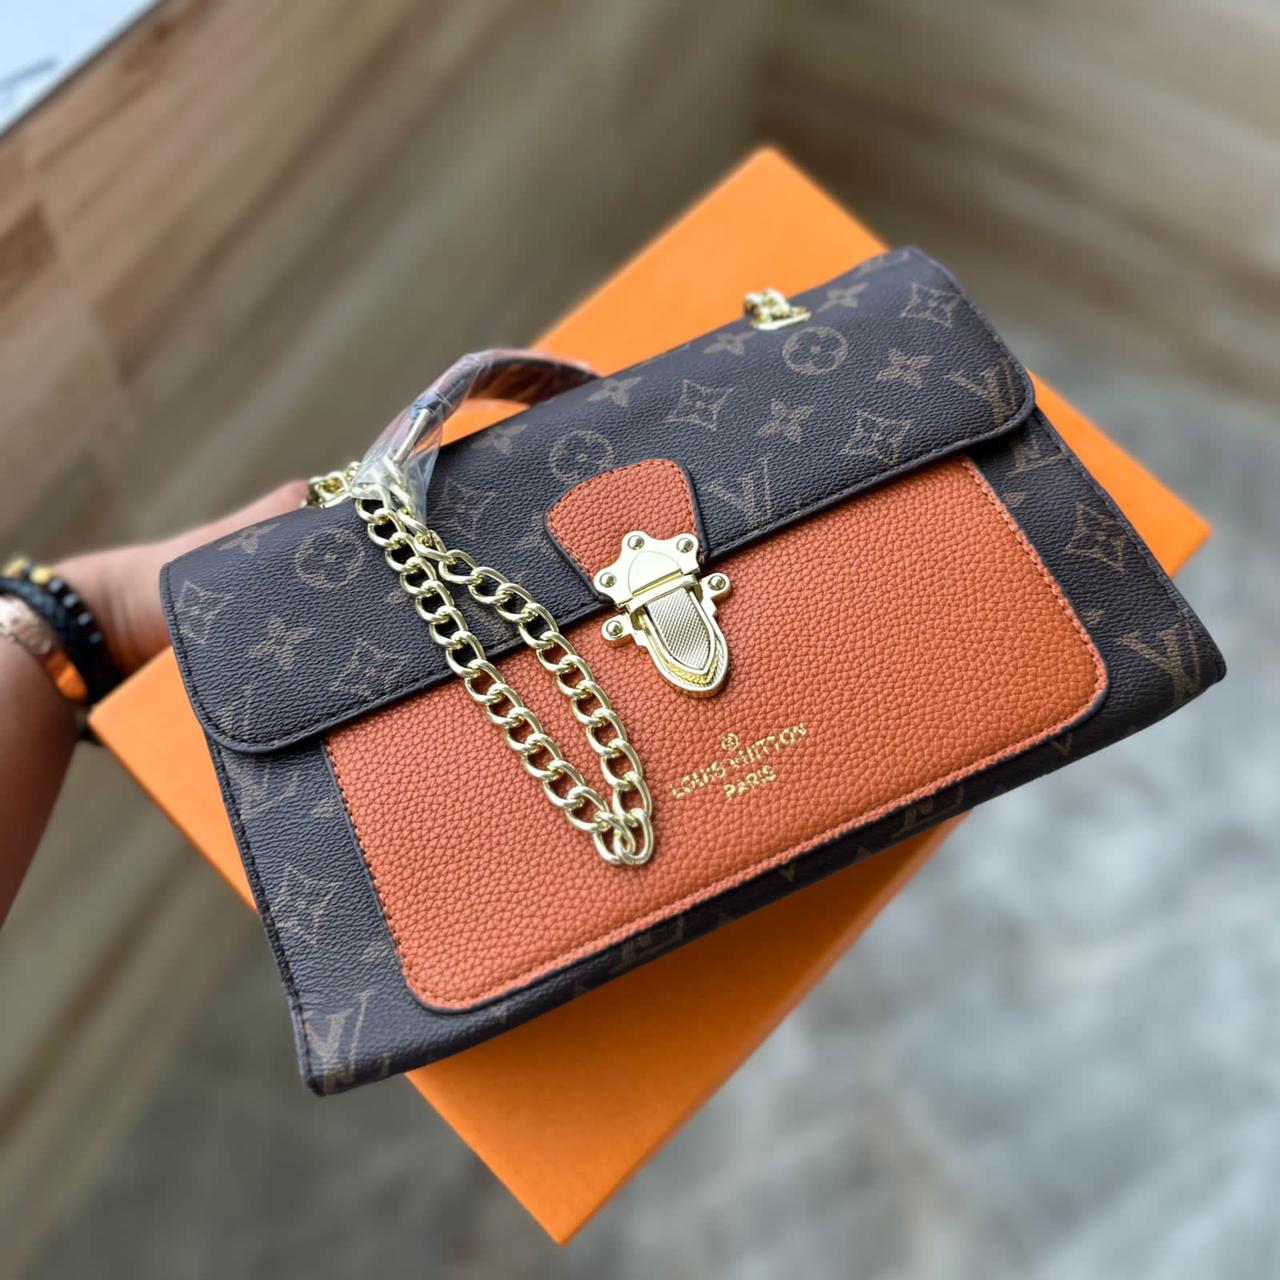 Buy online First Copy Lv Bag from bags for Women by Thefirstcopy24